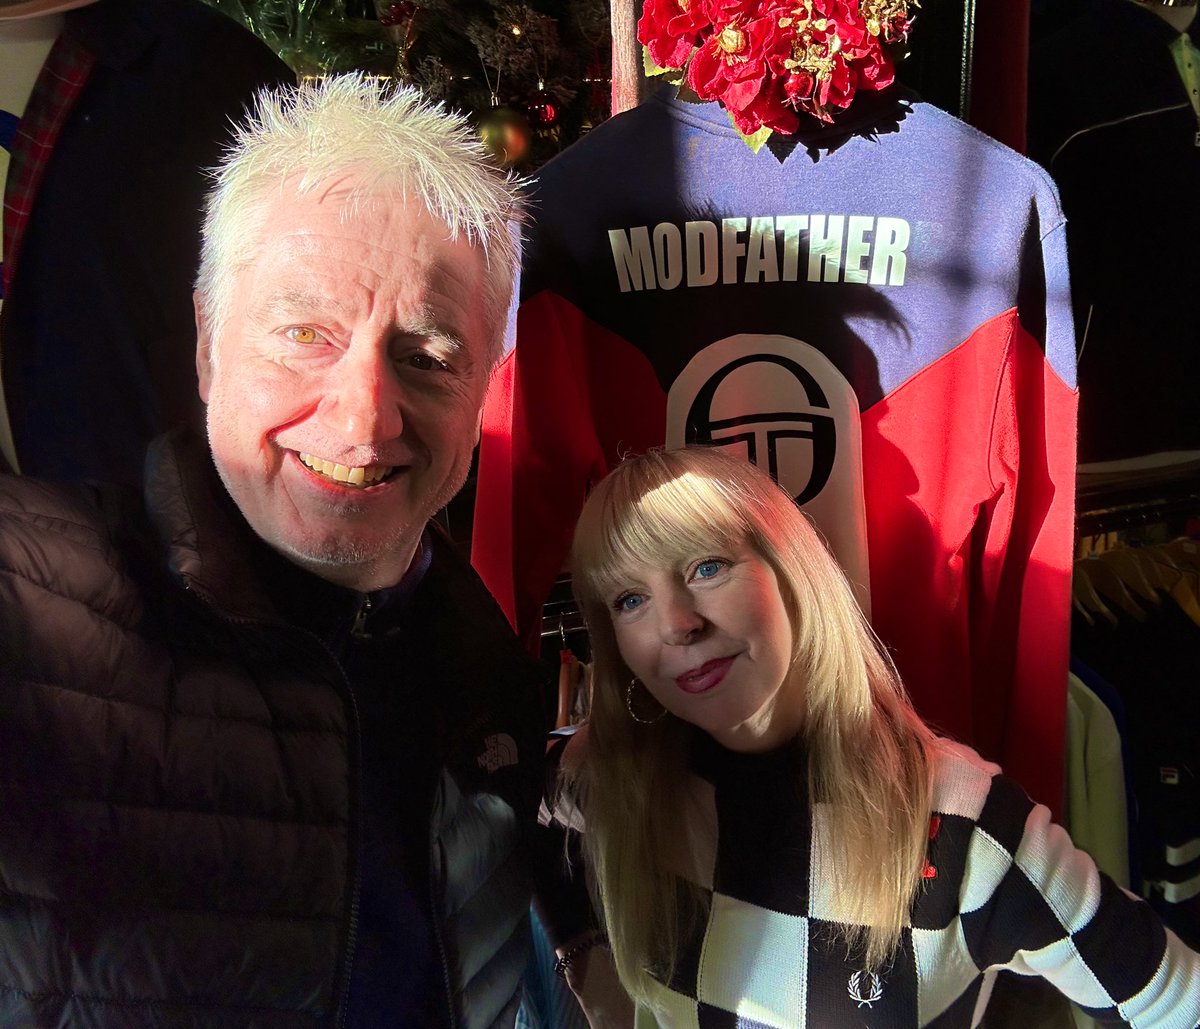 🎯 Getting a few togs down at @Modfatherlondon - Thanks to Pauline for great service and what a place to shop! 😊👍